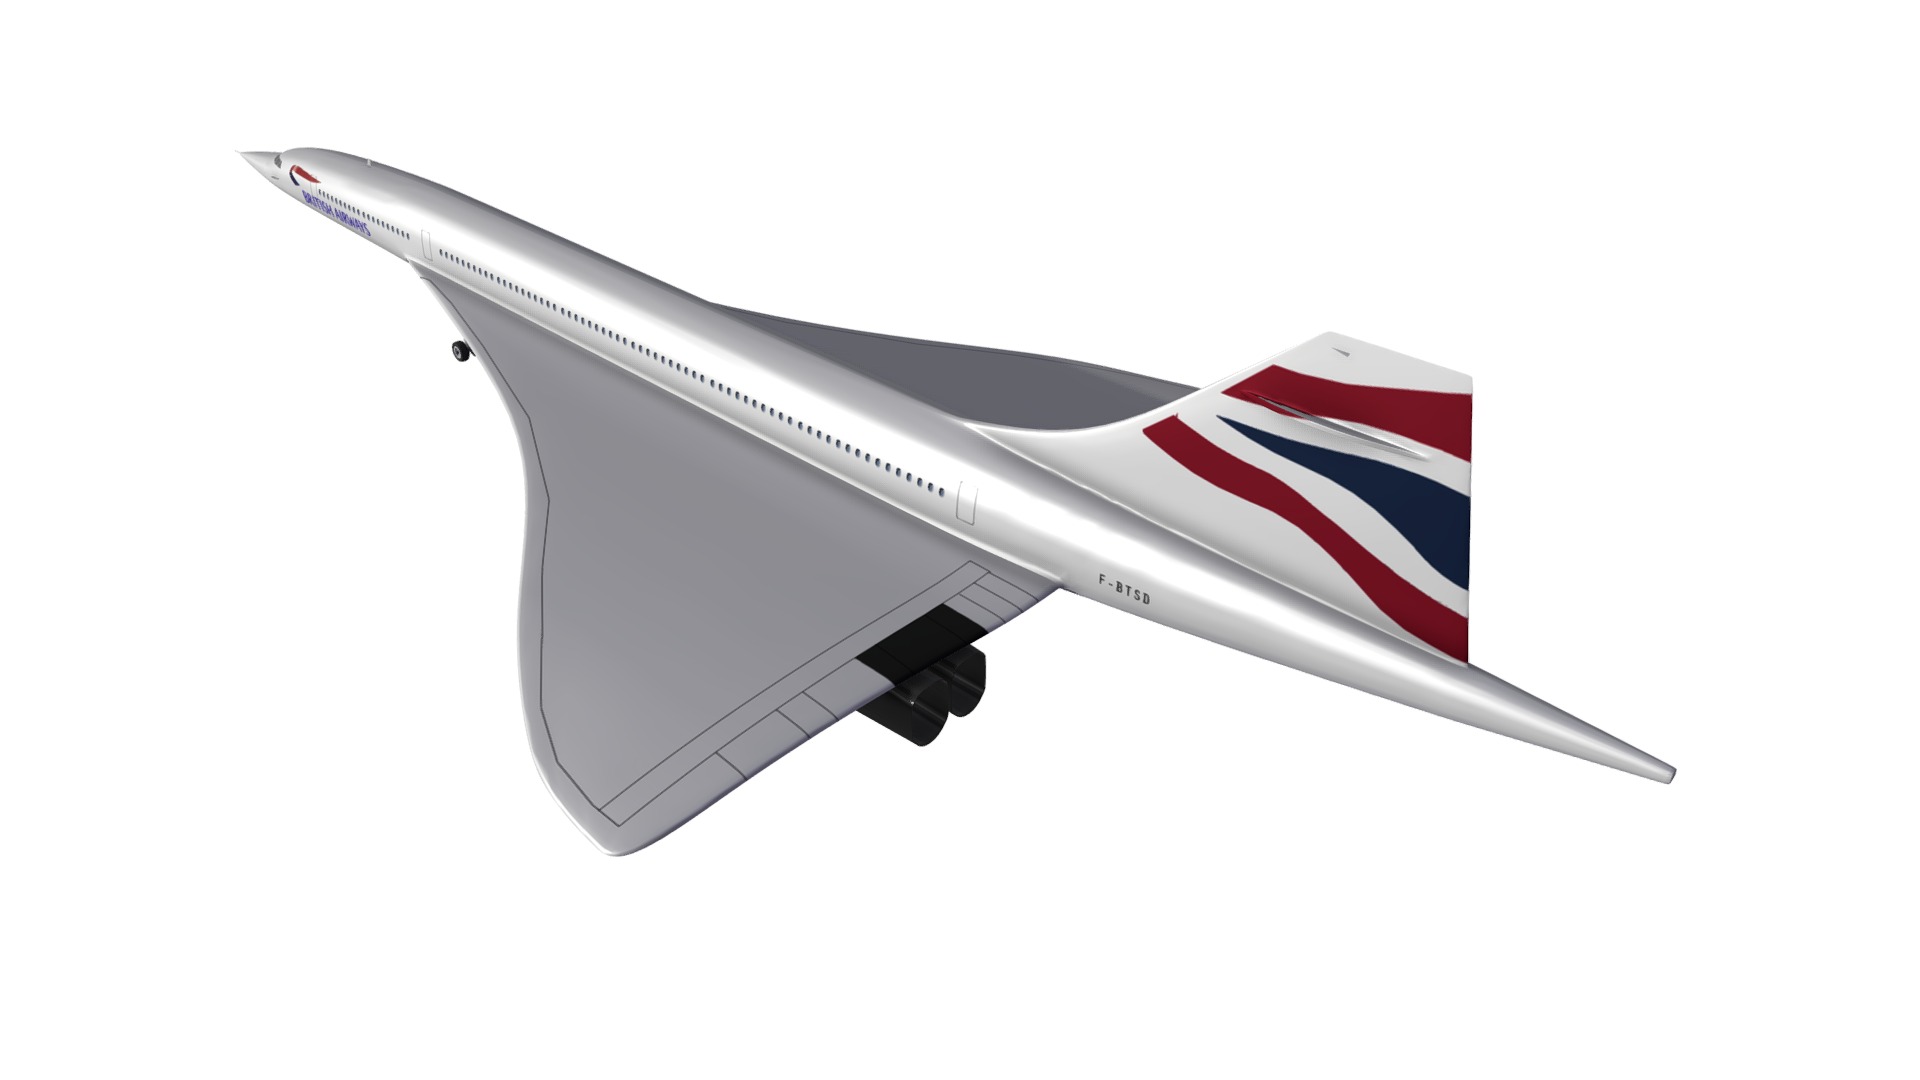 3D model Concorde Supersonic Airliner British Airways - This is a 3D model of the Concorde Supersonic Airliner British Airways. The 3D model is about a silver and red airplane.